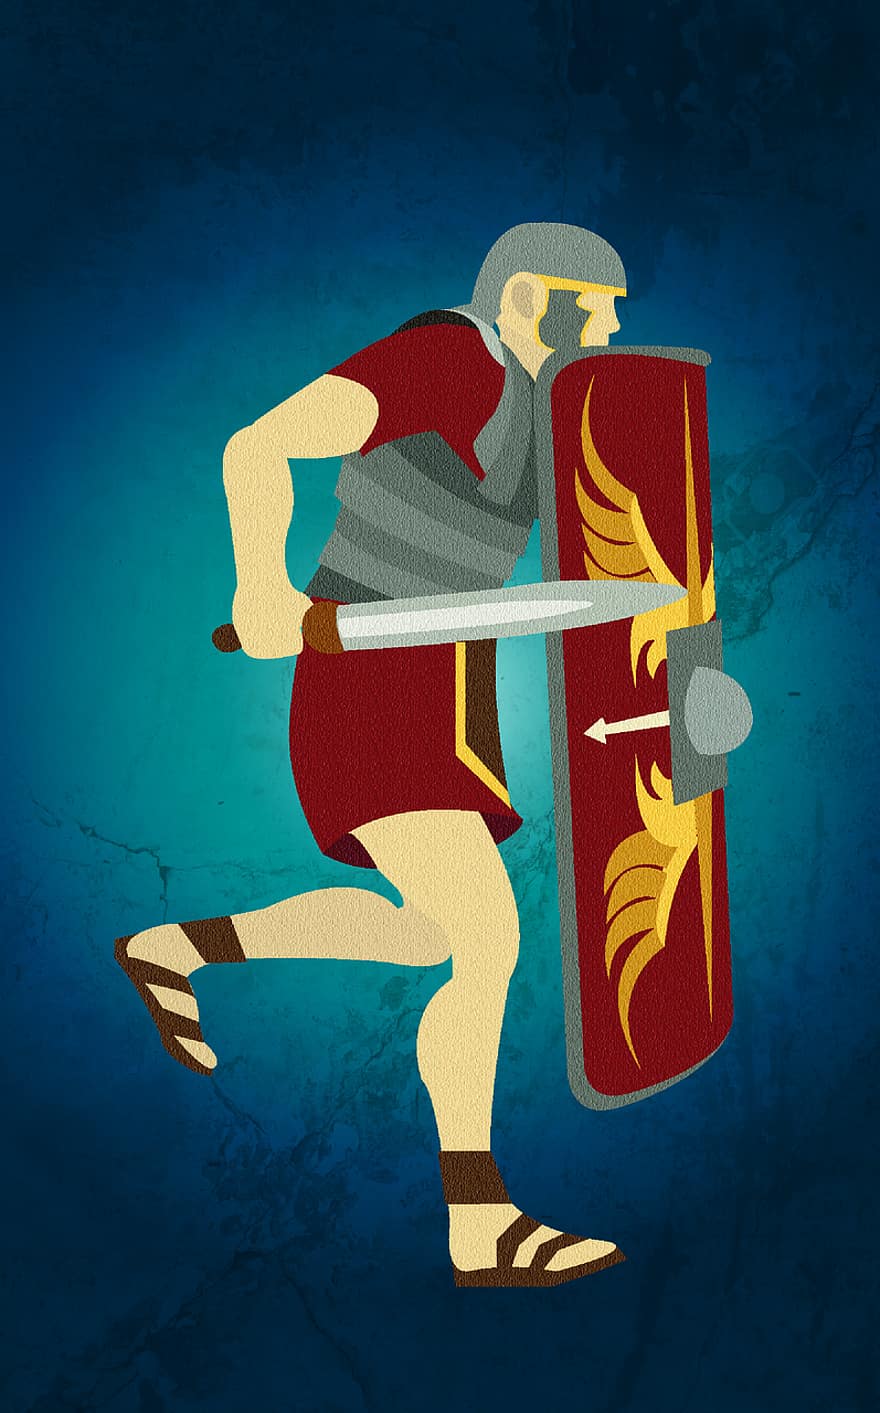 Art, Roman, Rome, Soldier, Roman Soldier, Poster, Shield, Sword, Coat Of Arms, Ancient, Medieval